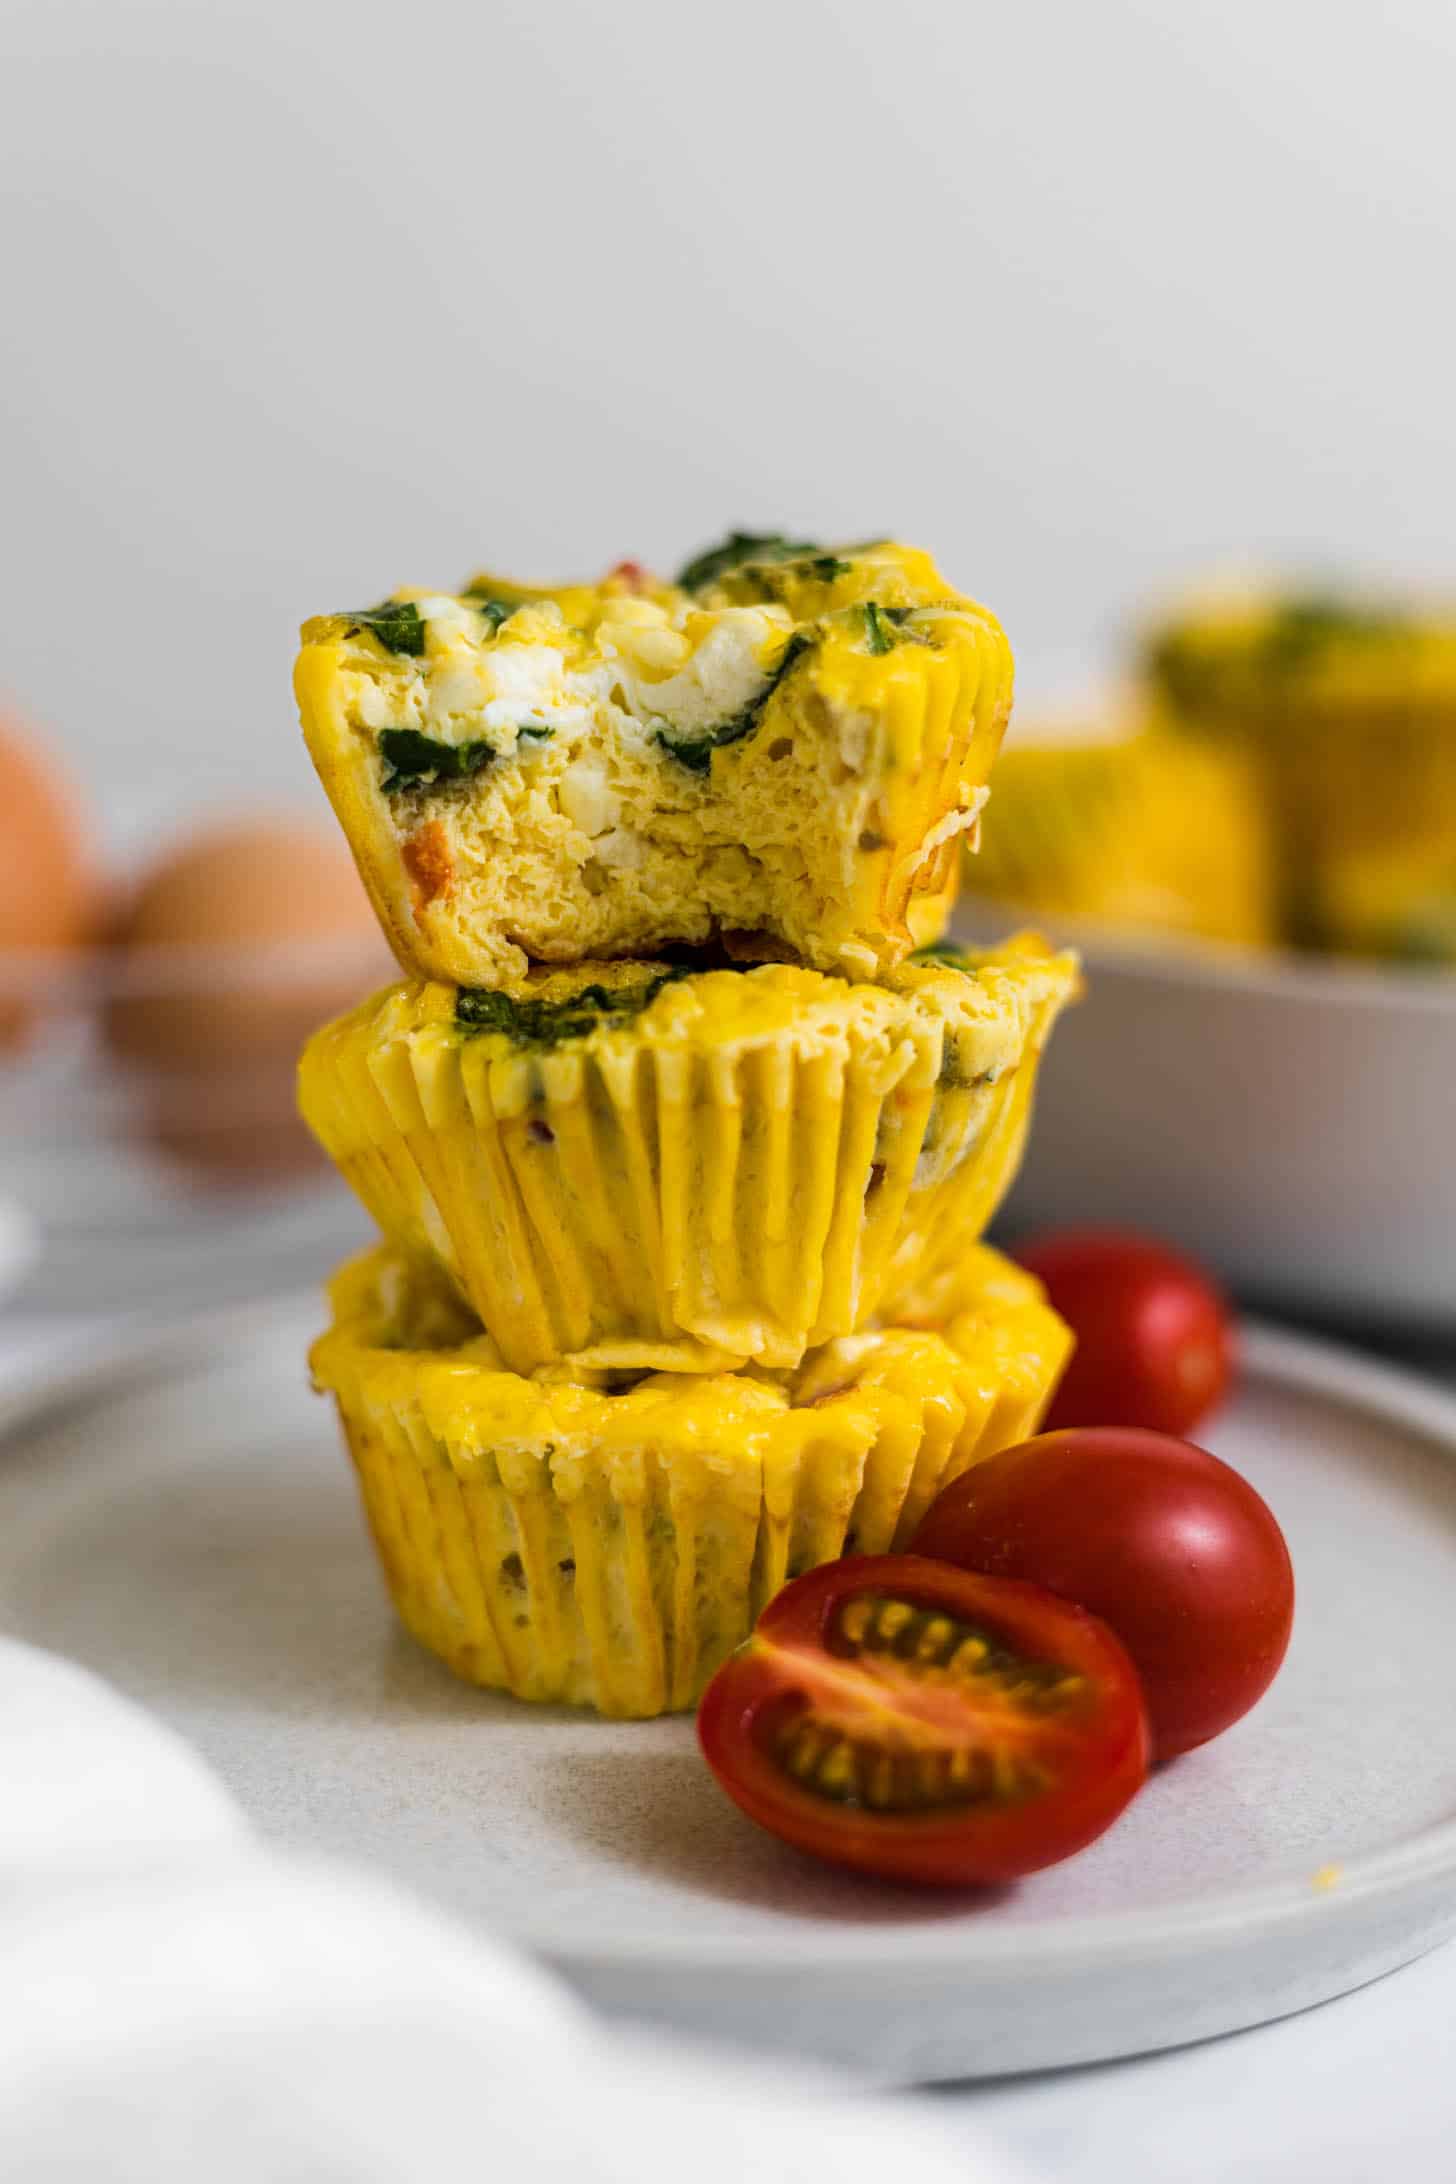 Easy Vegetarian Egg Bites With Spinach & Feta Cheese - Supermom Eats